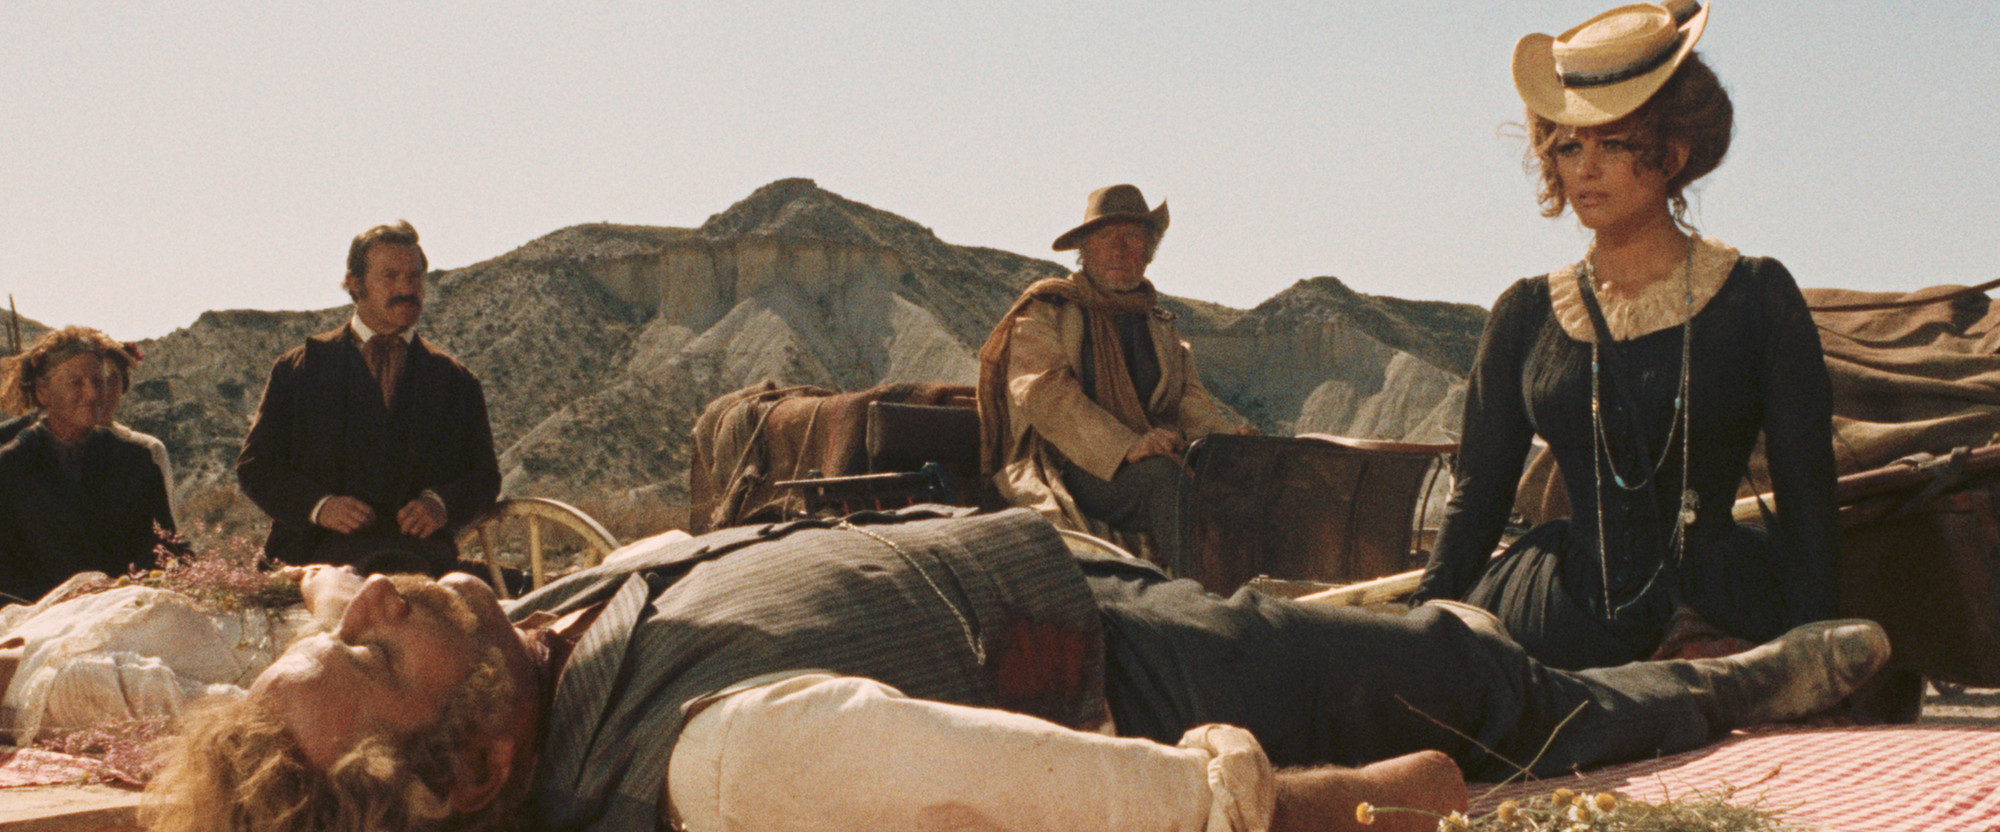 Once Upon Time in the West. 1968. Directed by Sergio Leone | MoMA